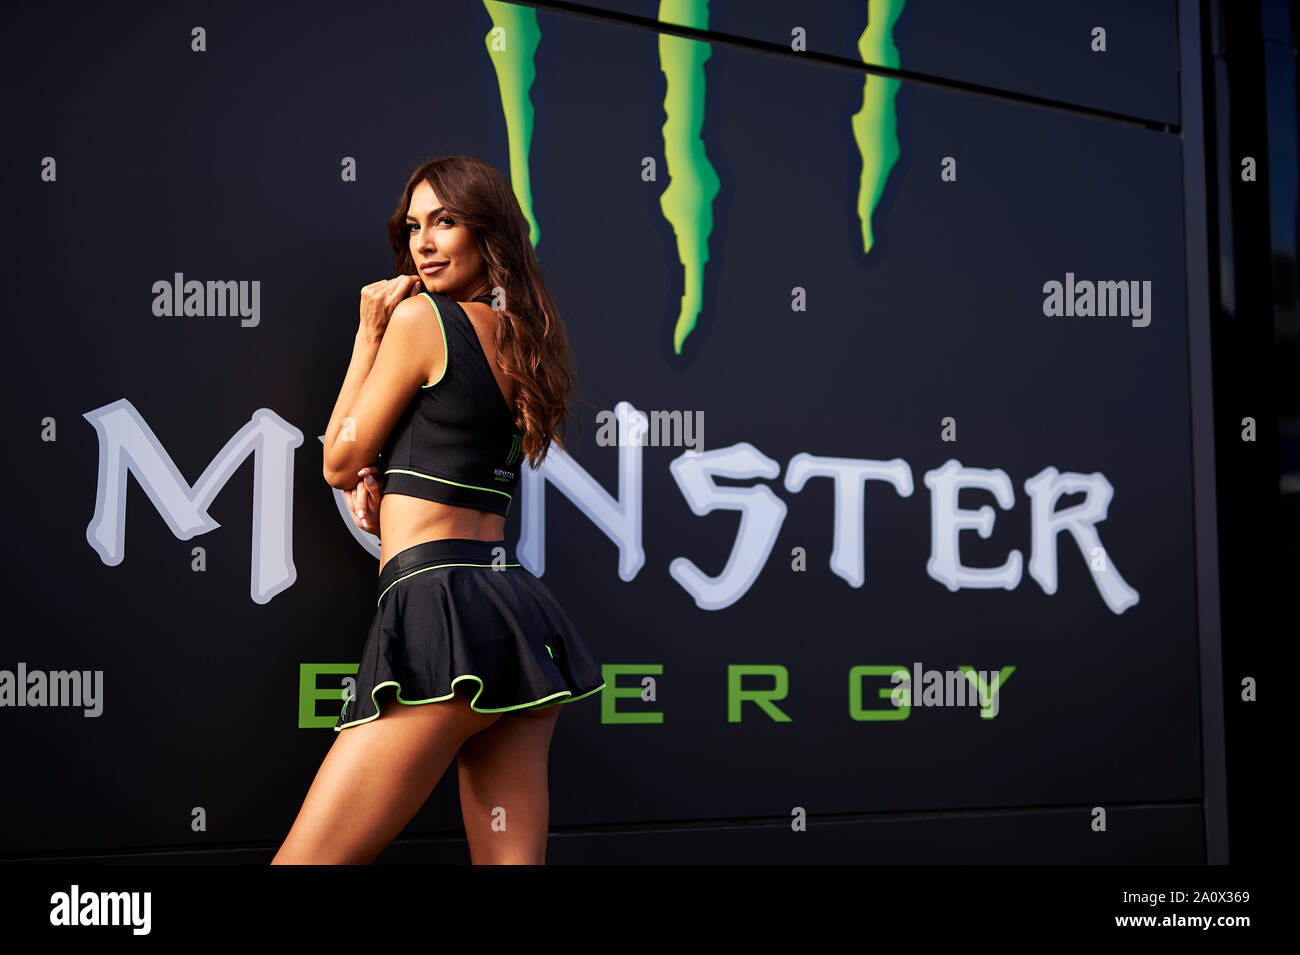 22nd September 2019; Ciudad del Motor de Aragon, Alcaniz, Spain; Aragon Motorcycle Grand Prix, Race Day; a Monster Energy paddock girl poses during the Warm Up Stock Photo